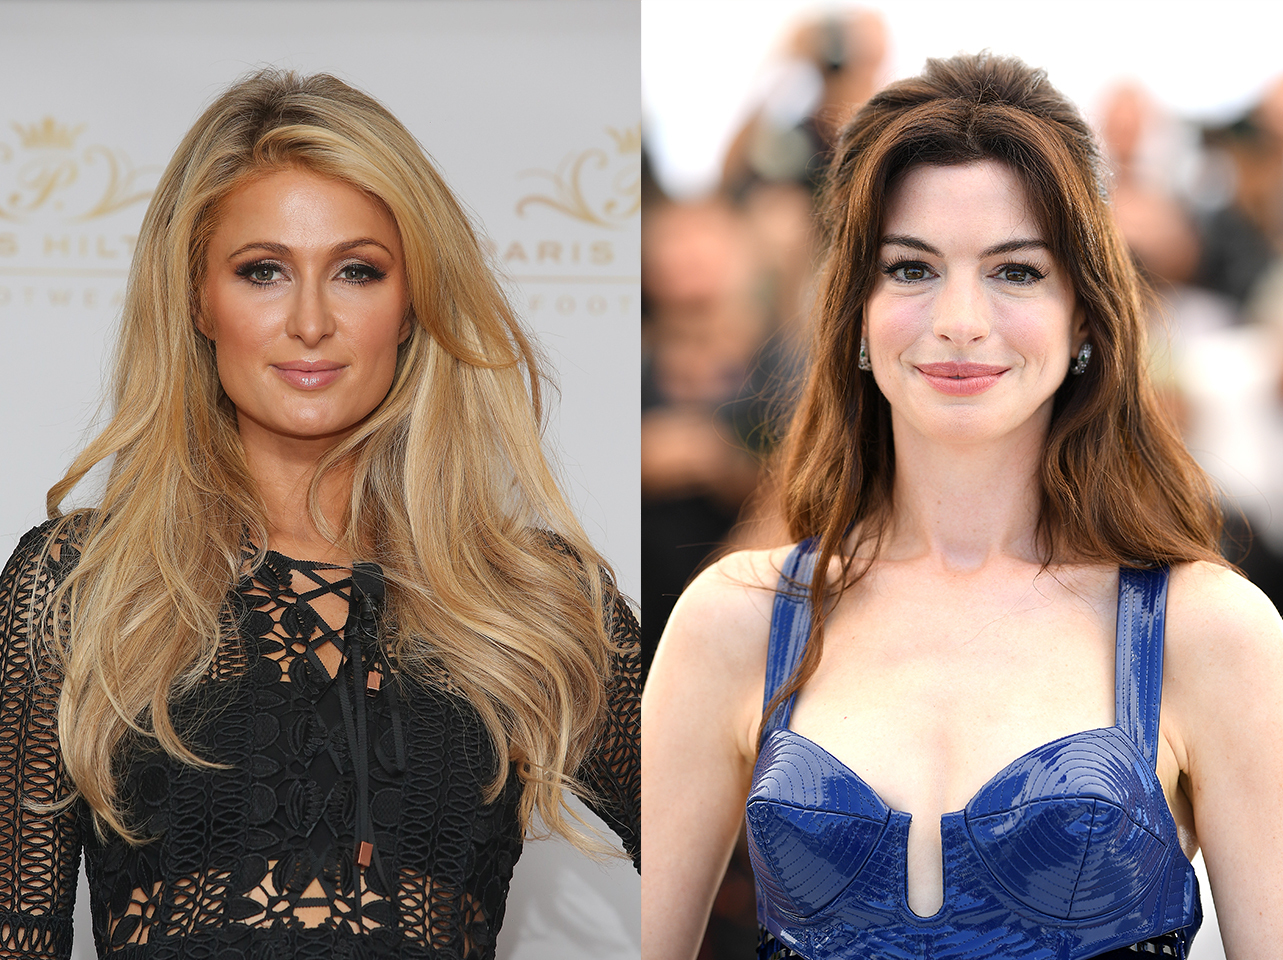 Paris Hilton and Anne Hathaway | Source: Getty Images